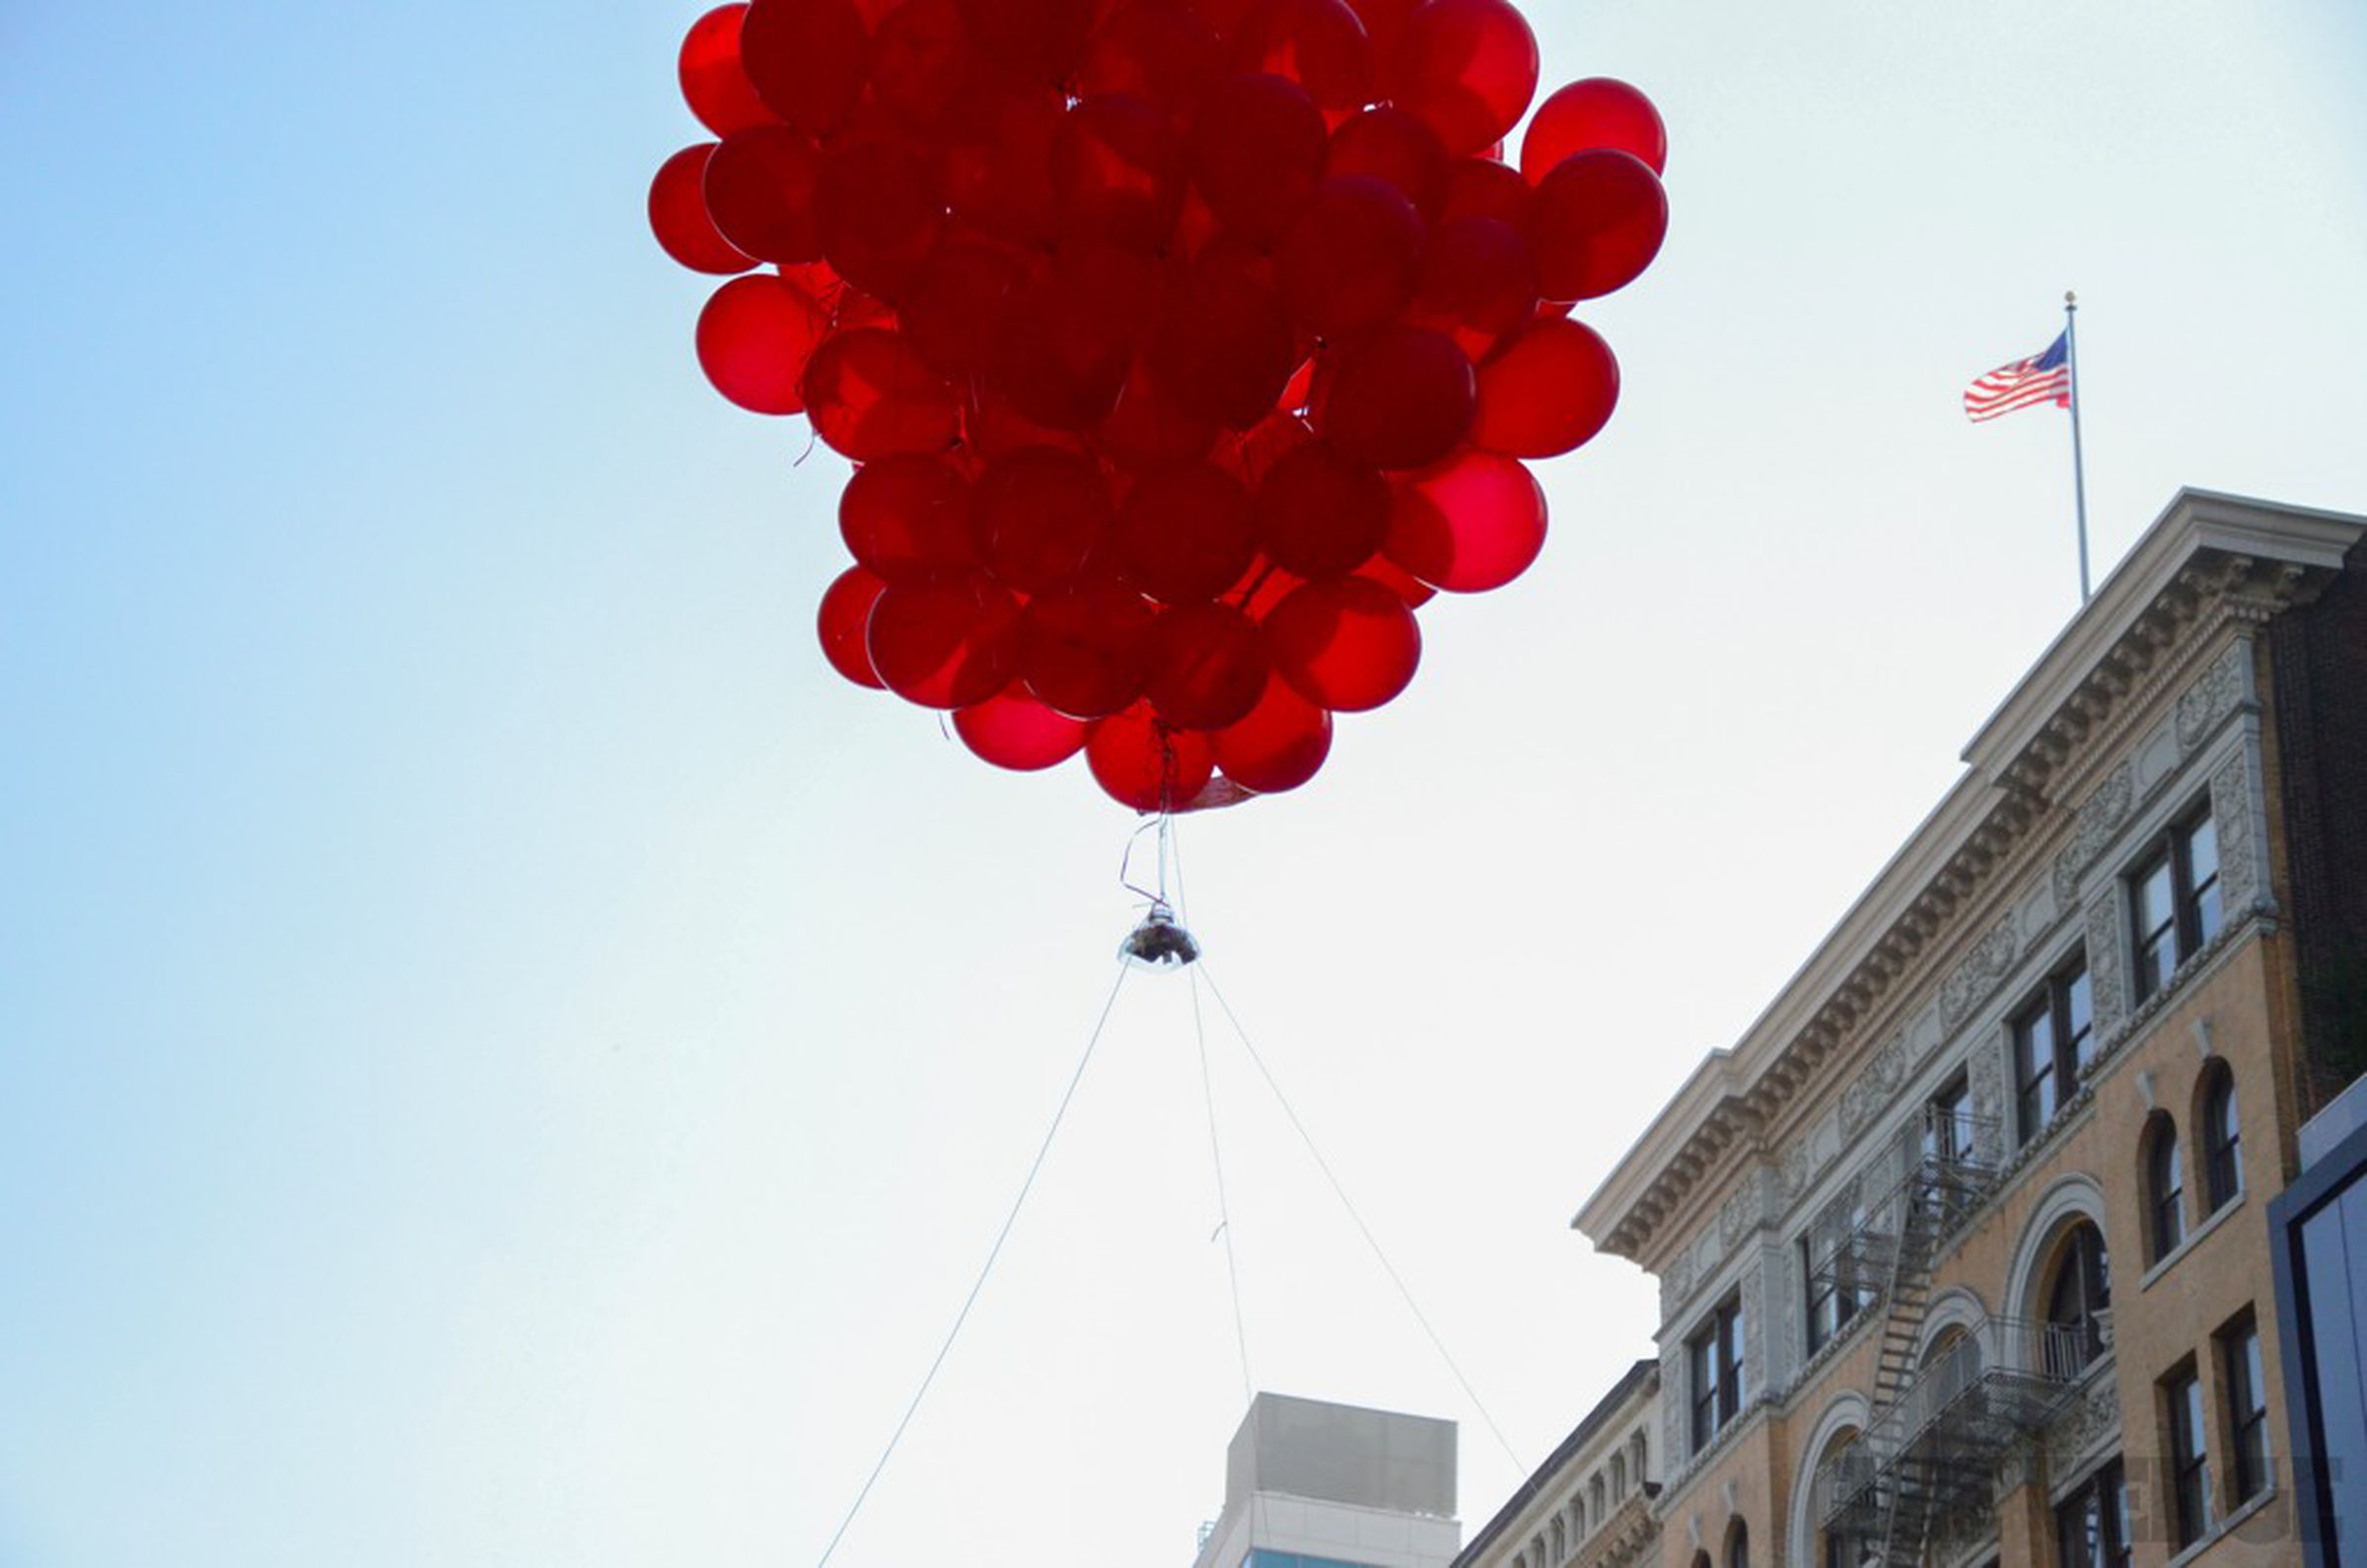 Occupy's DIY balloon cameras map the skies above NYC